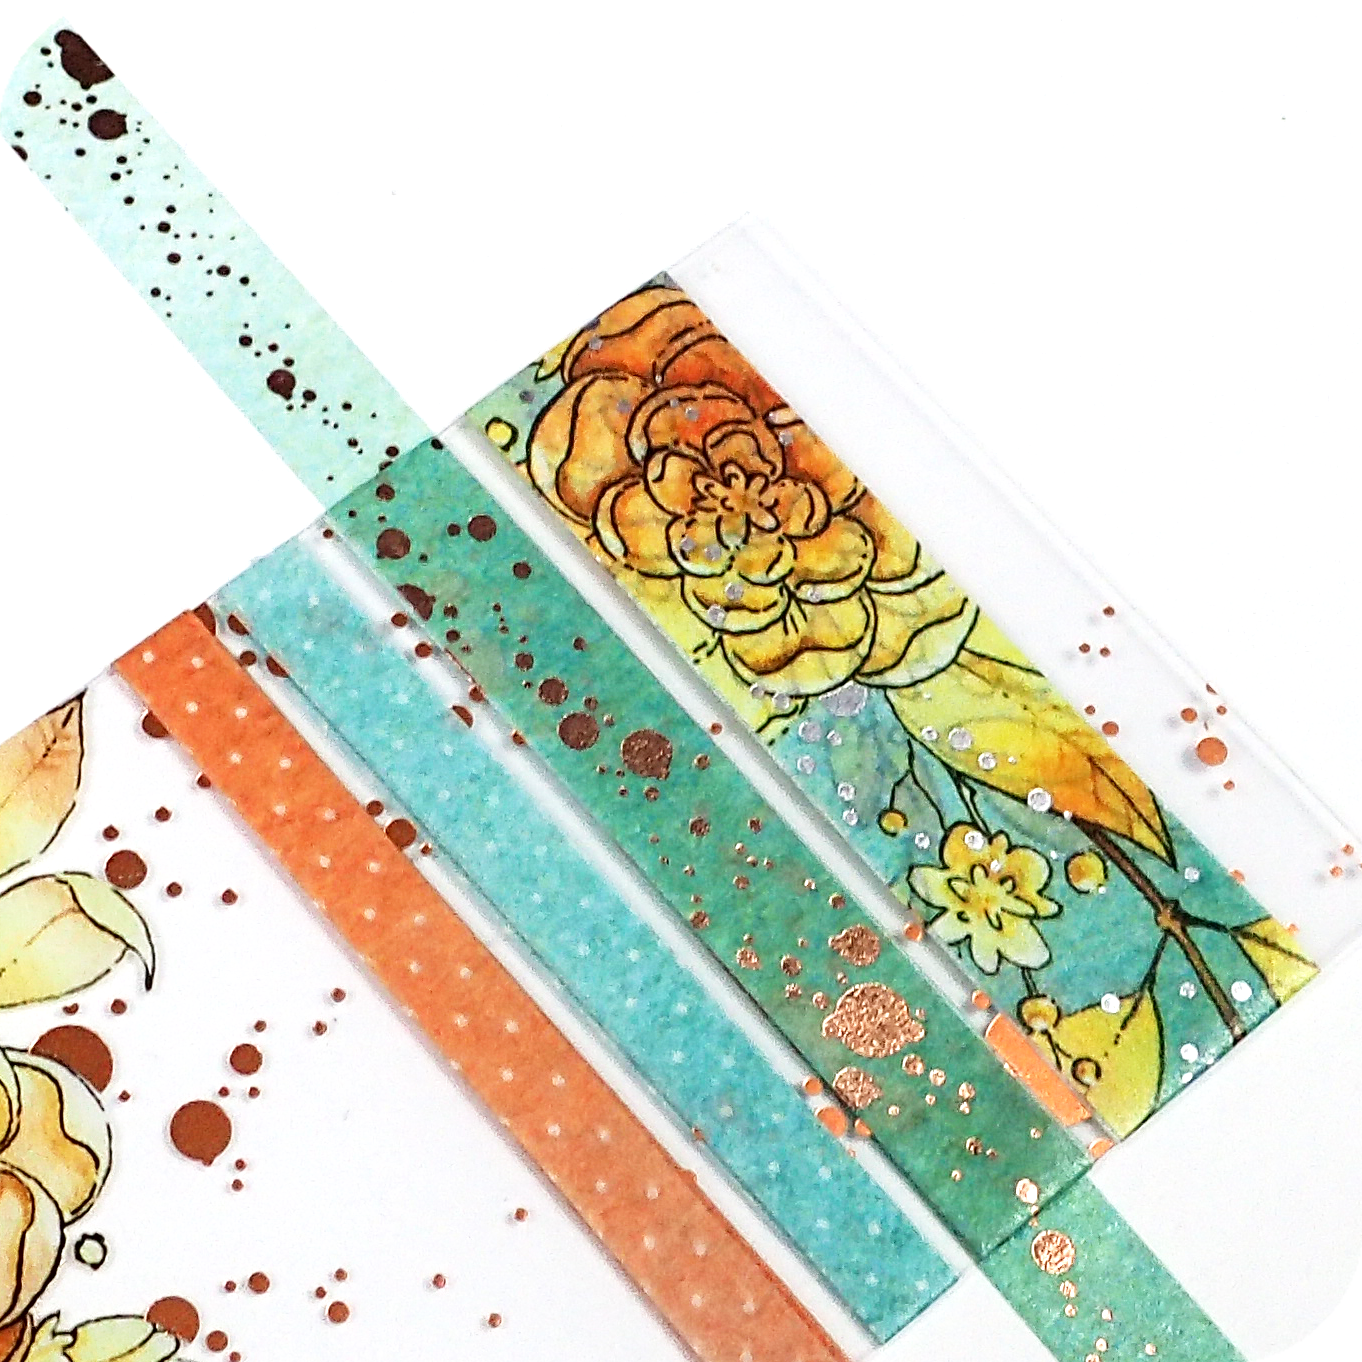 Feathery Fall - 8mm Washi Tape - Blue with Copper Foiled Spots